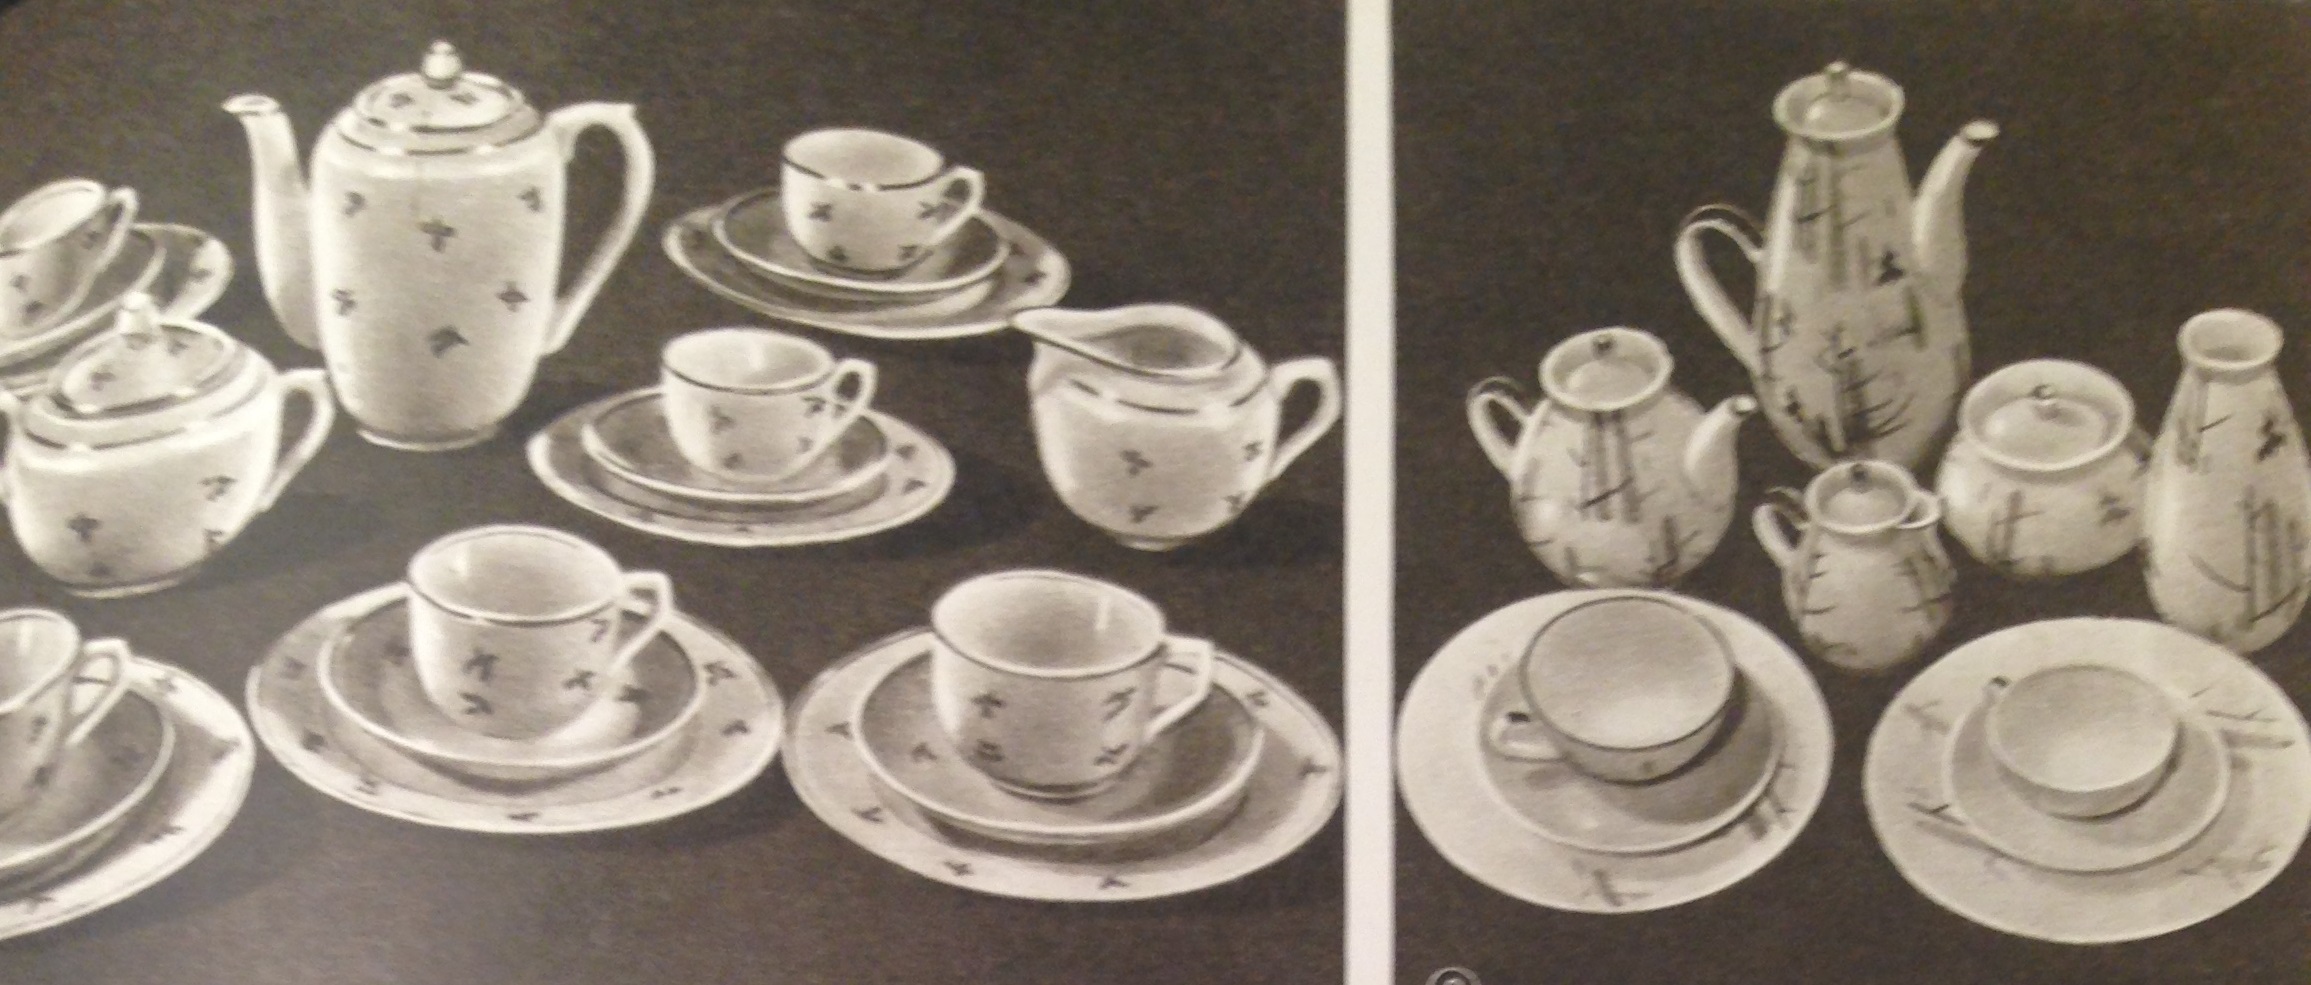 Soviet porcelain picture from Encyclopedia of the household